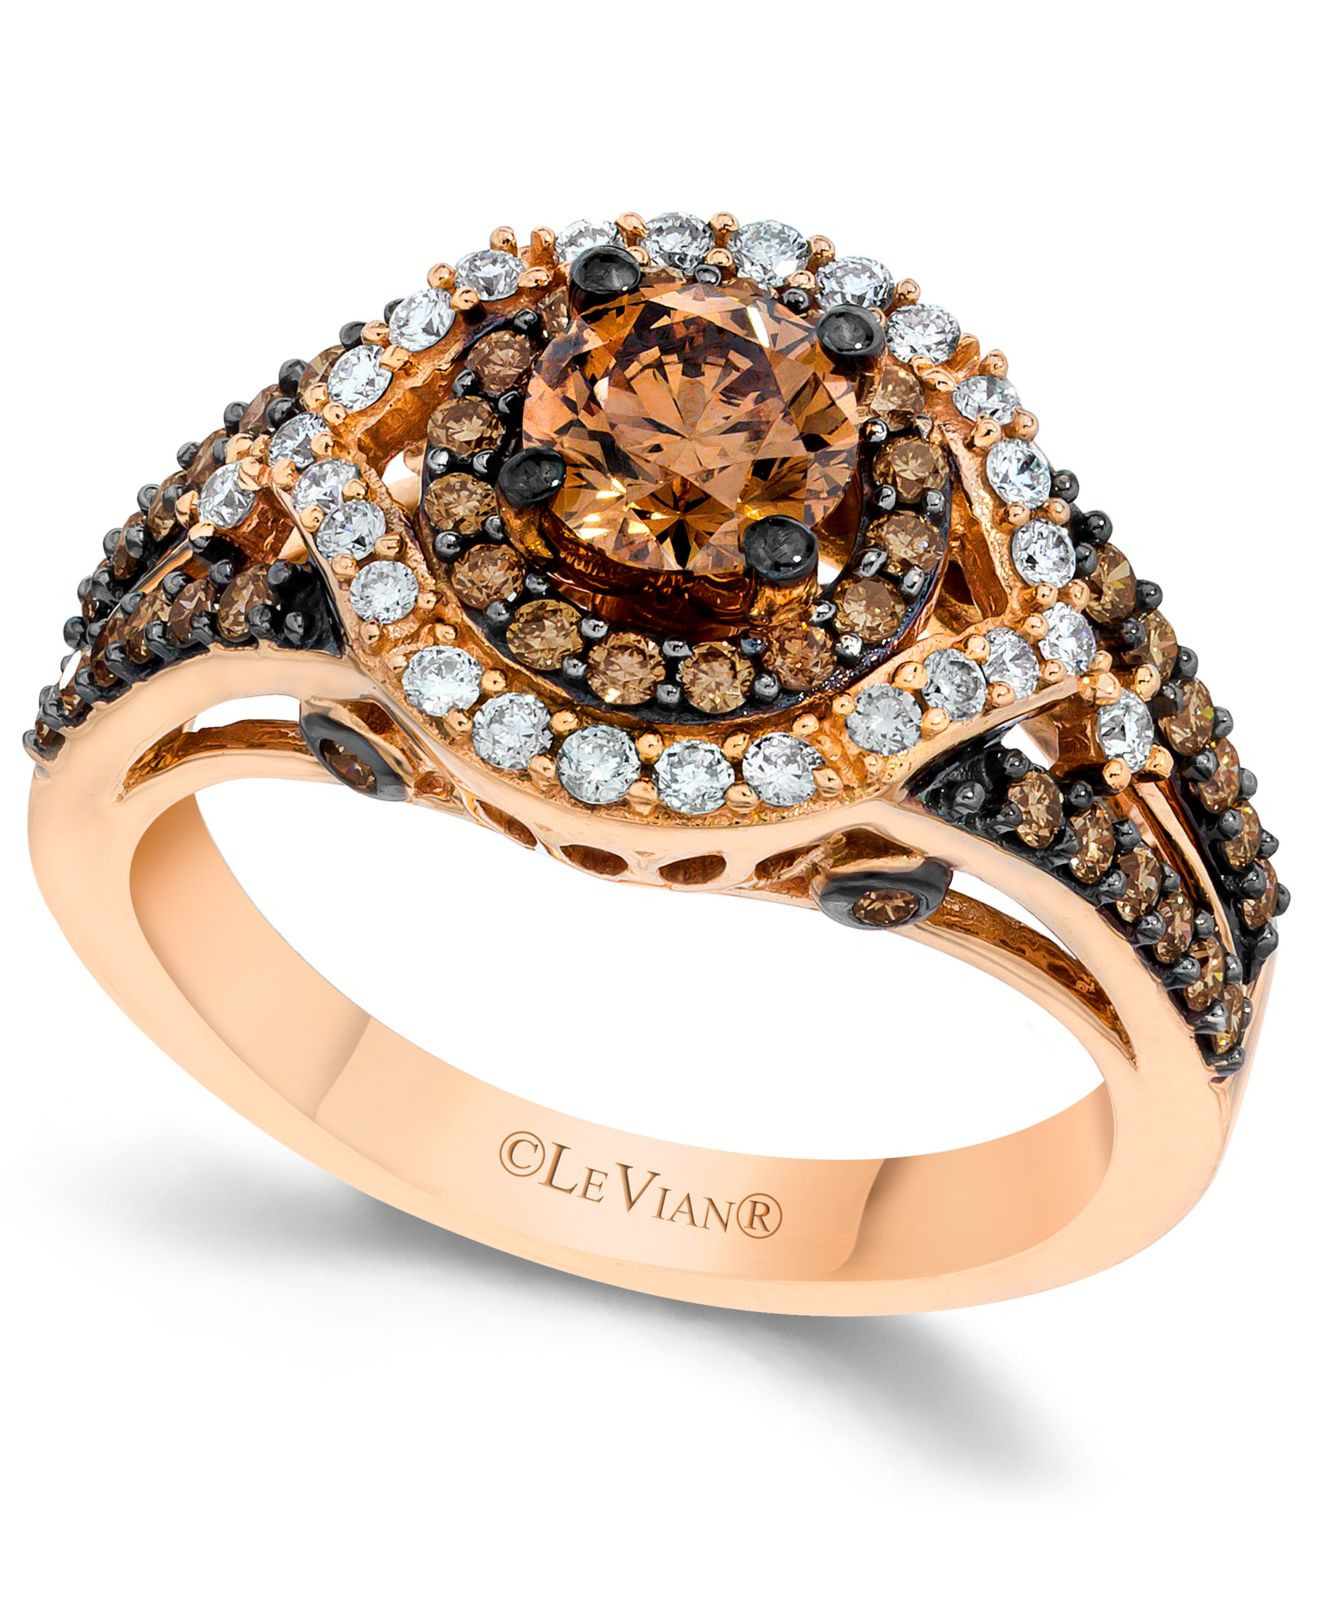 Rose Gold Engagement Rings With Chocolate Diamonds
 Le vian Chocolate And White Diamond Engagement Ring In 14k